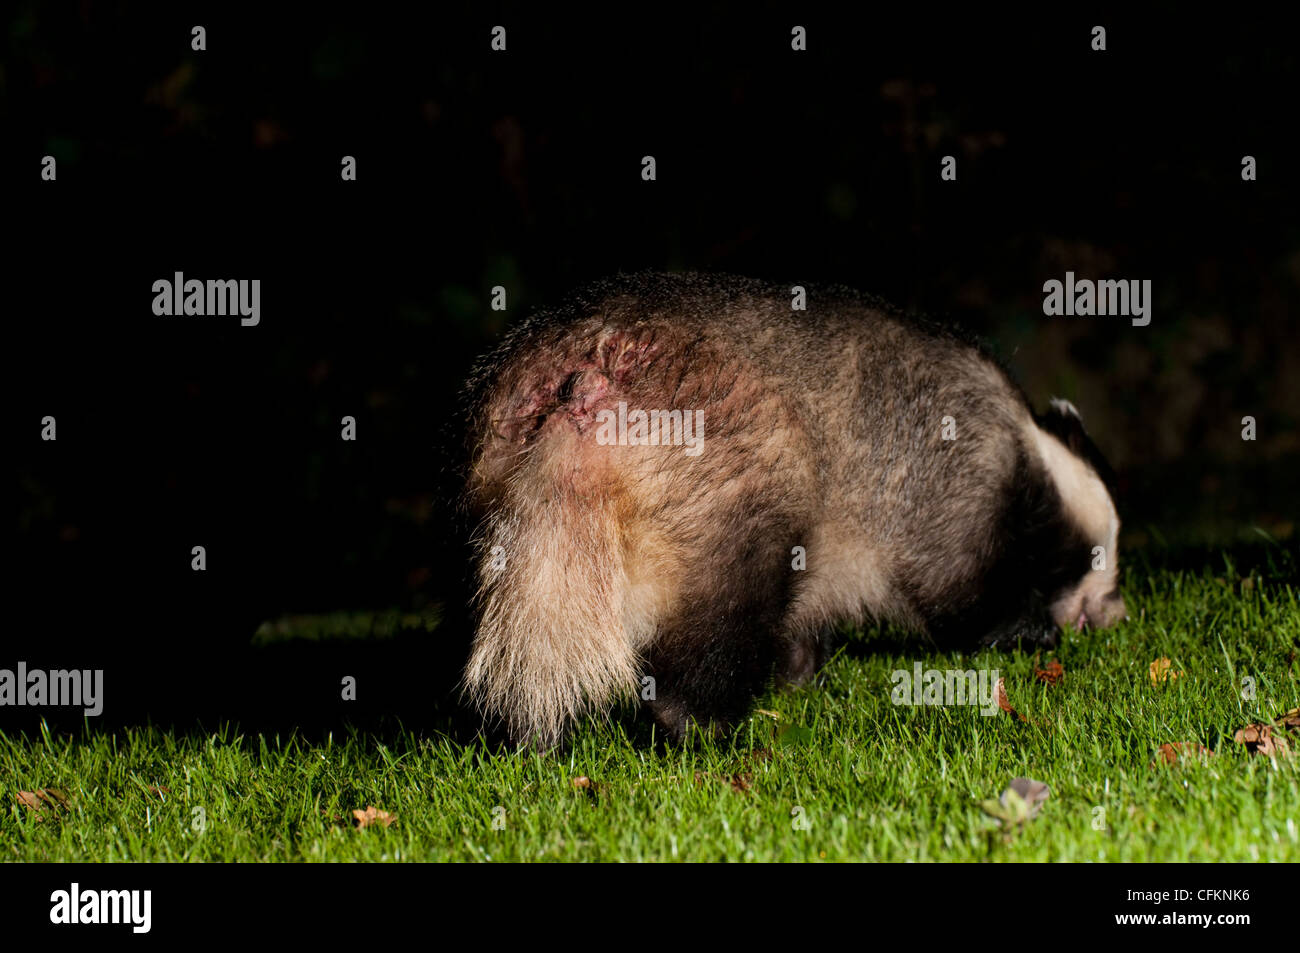 Badger showing bite wounds from fighting with other badgers Stock Photo